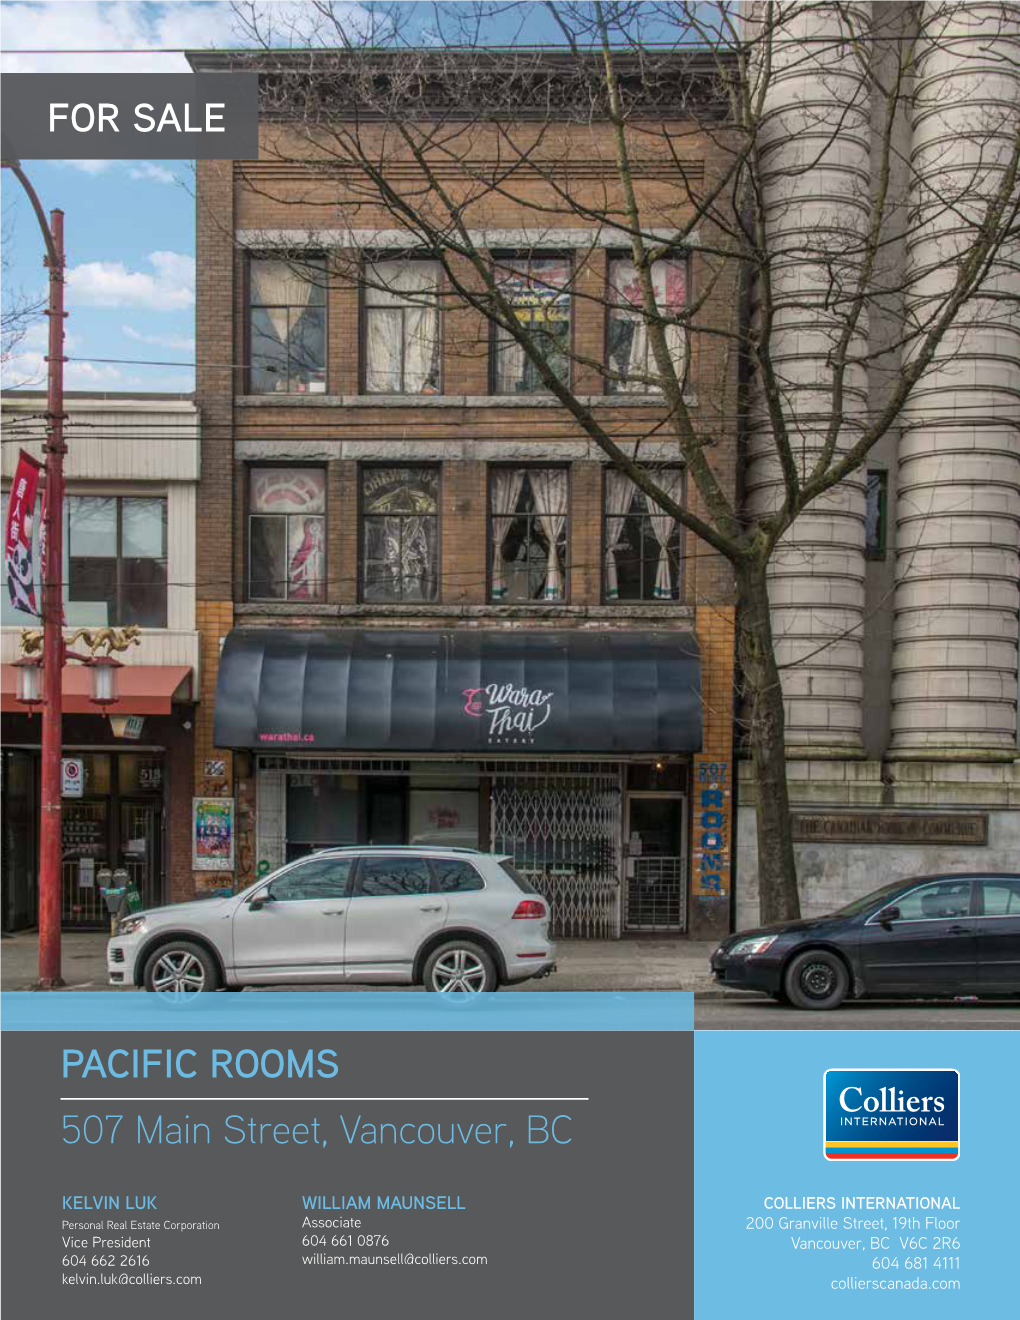 PACIFIC ROOMS 507 Main Street, Vancouver, BC